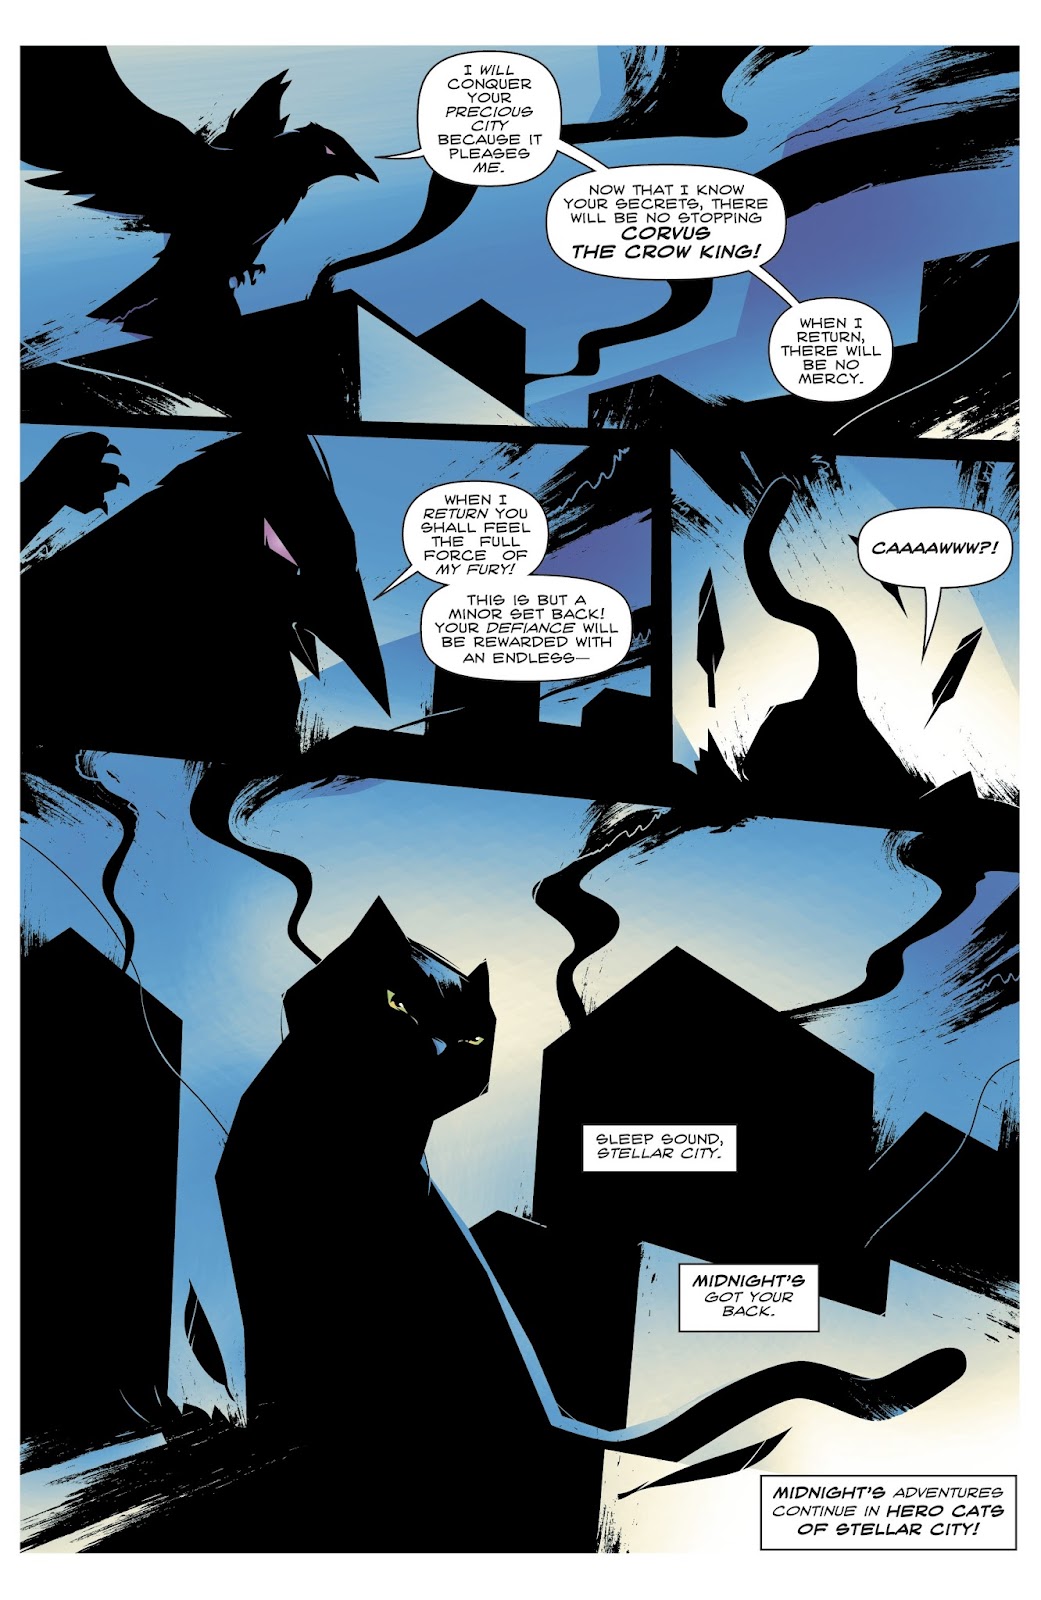 Hero Cats: Midnight Over Stellar City Vol. 2 issue 3 - Page 24